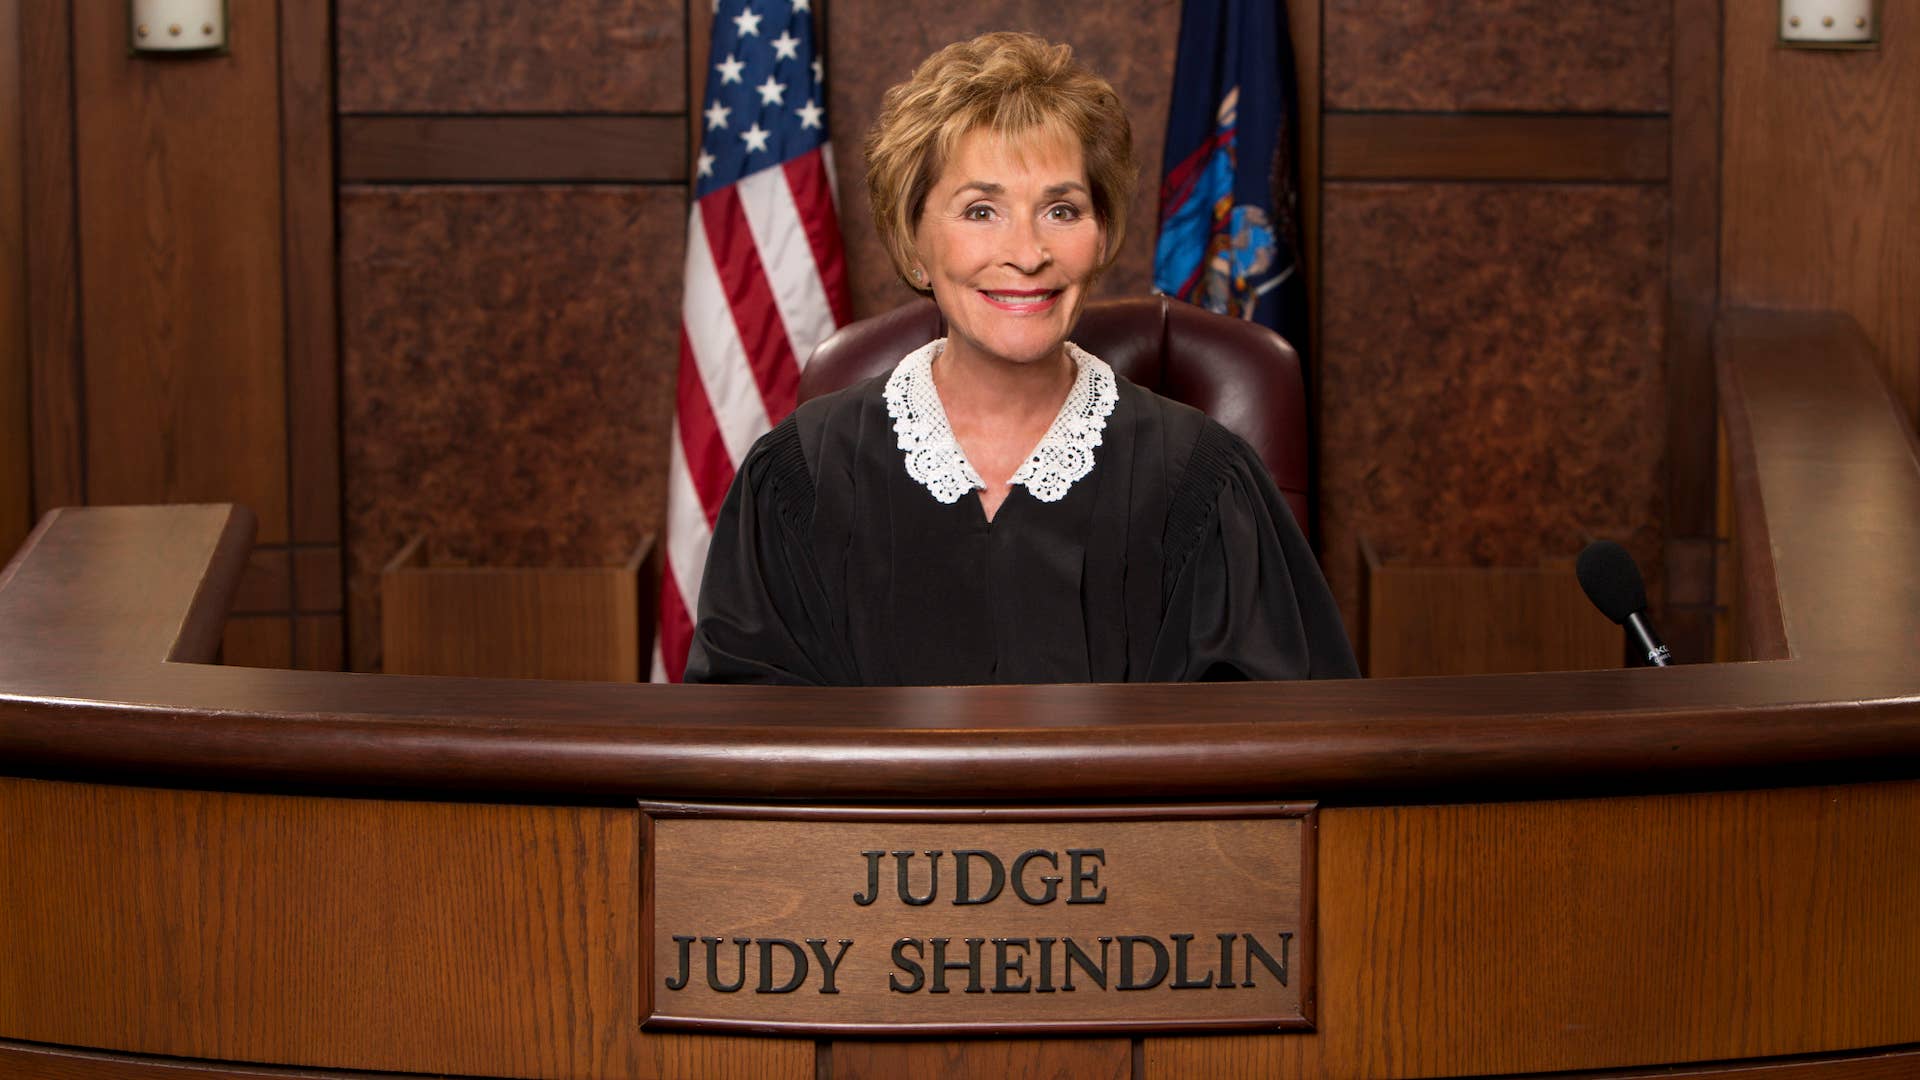 Photo of Judge Judy sitting in her chair